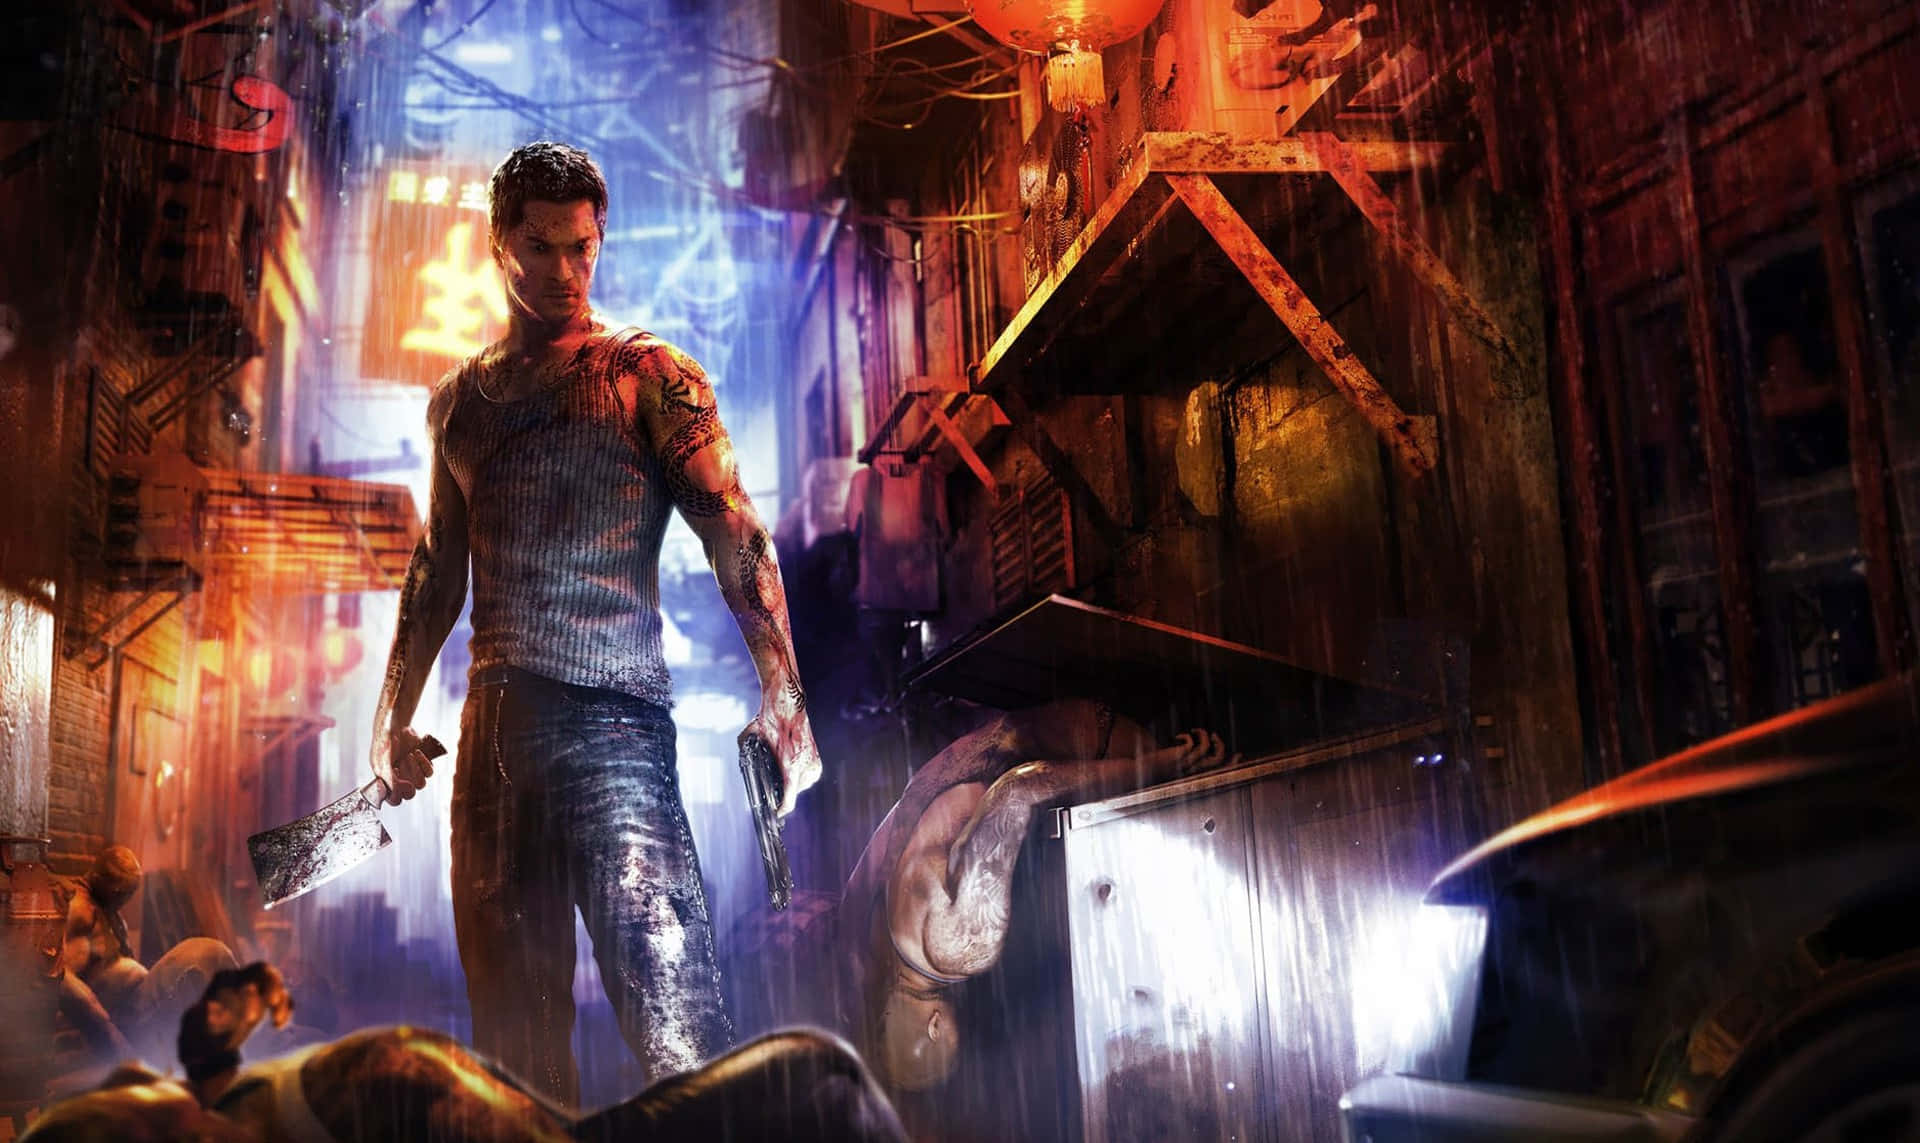 Explore the criminal underworld of Hong Kong in Sleeping Dogs